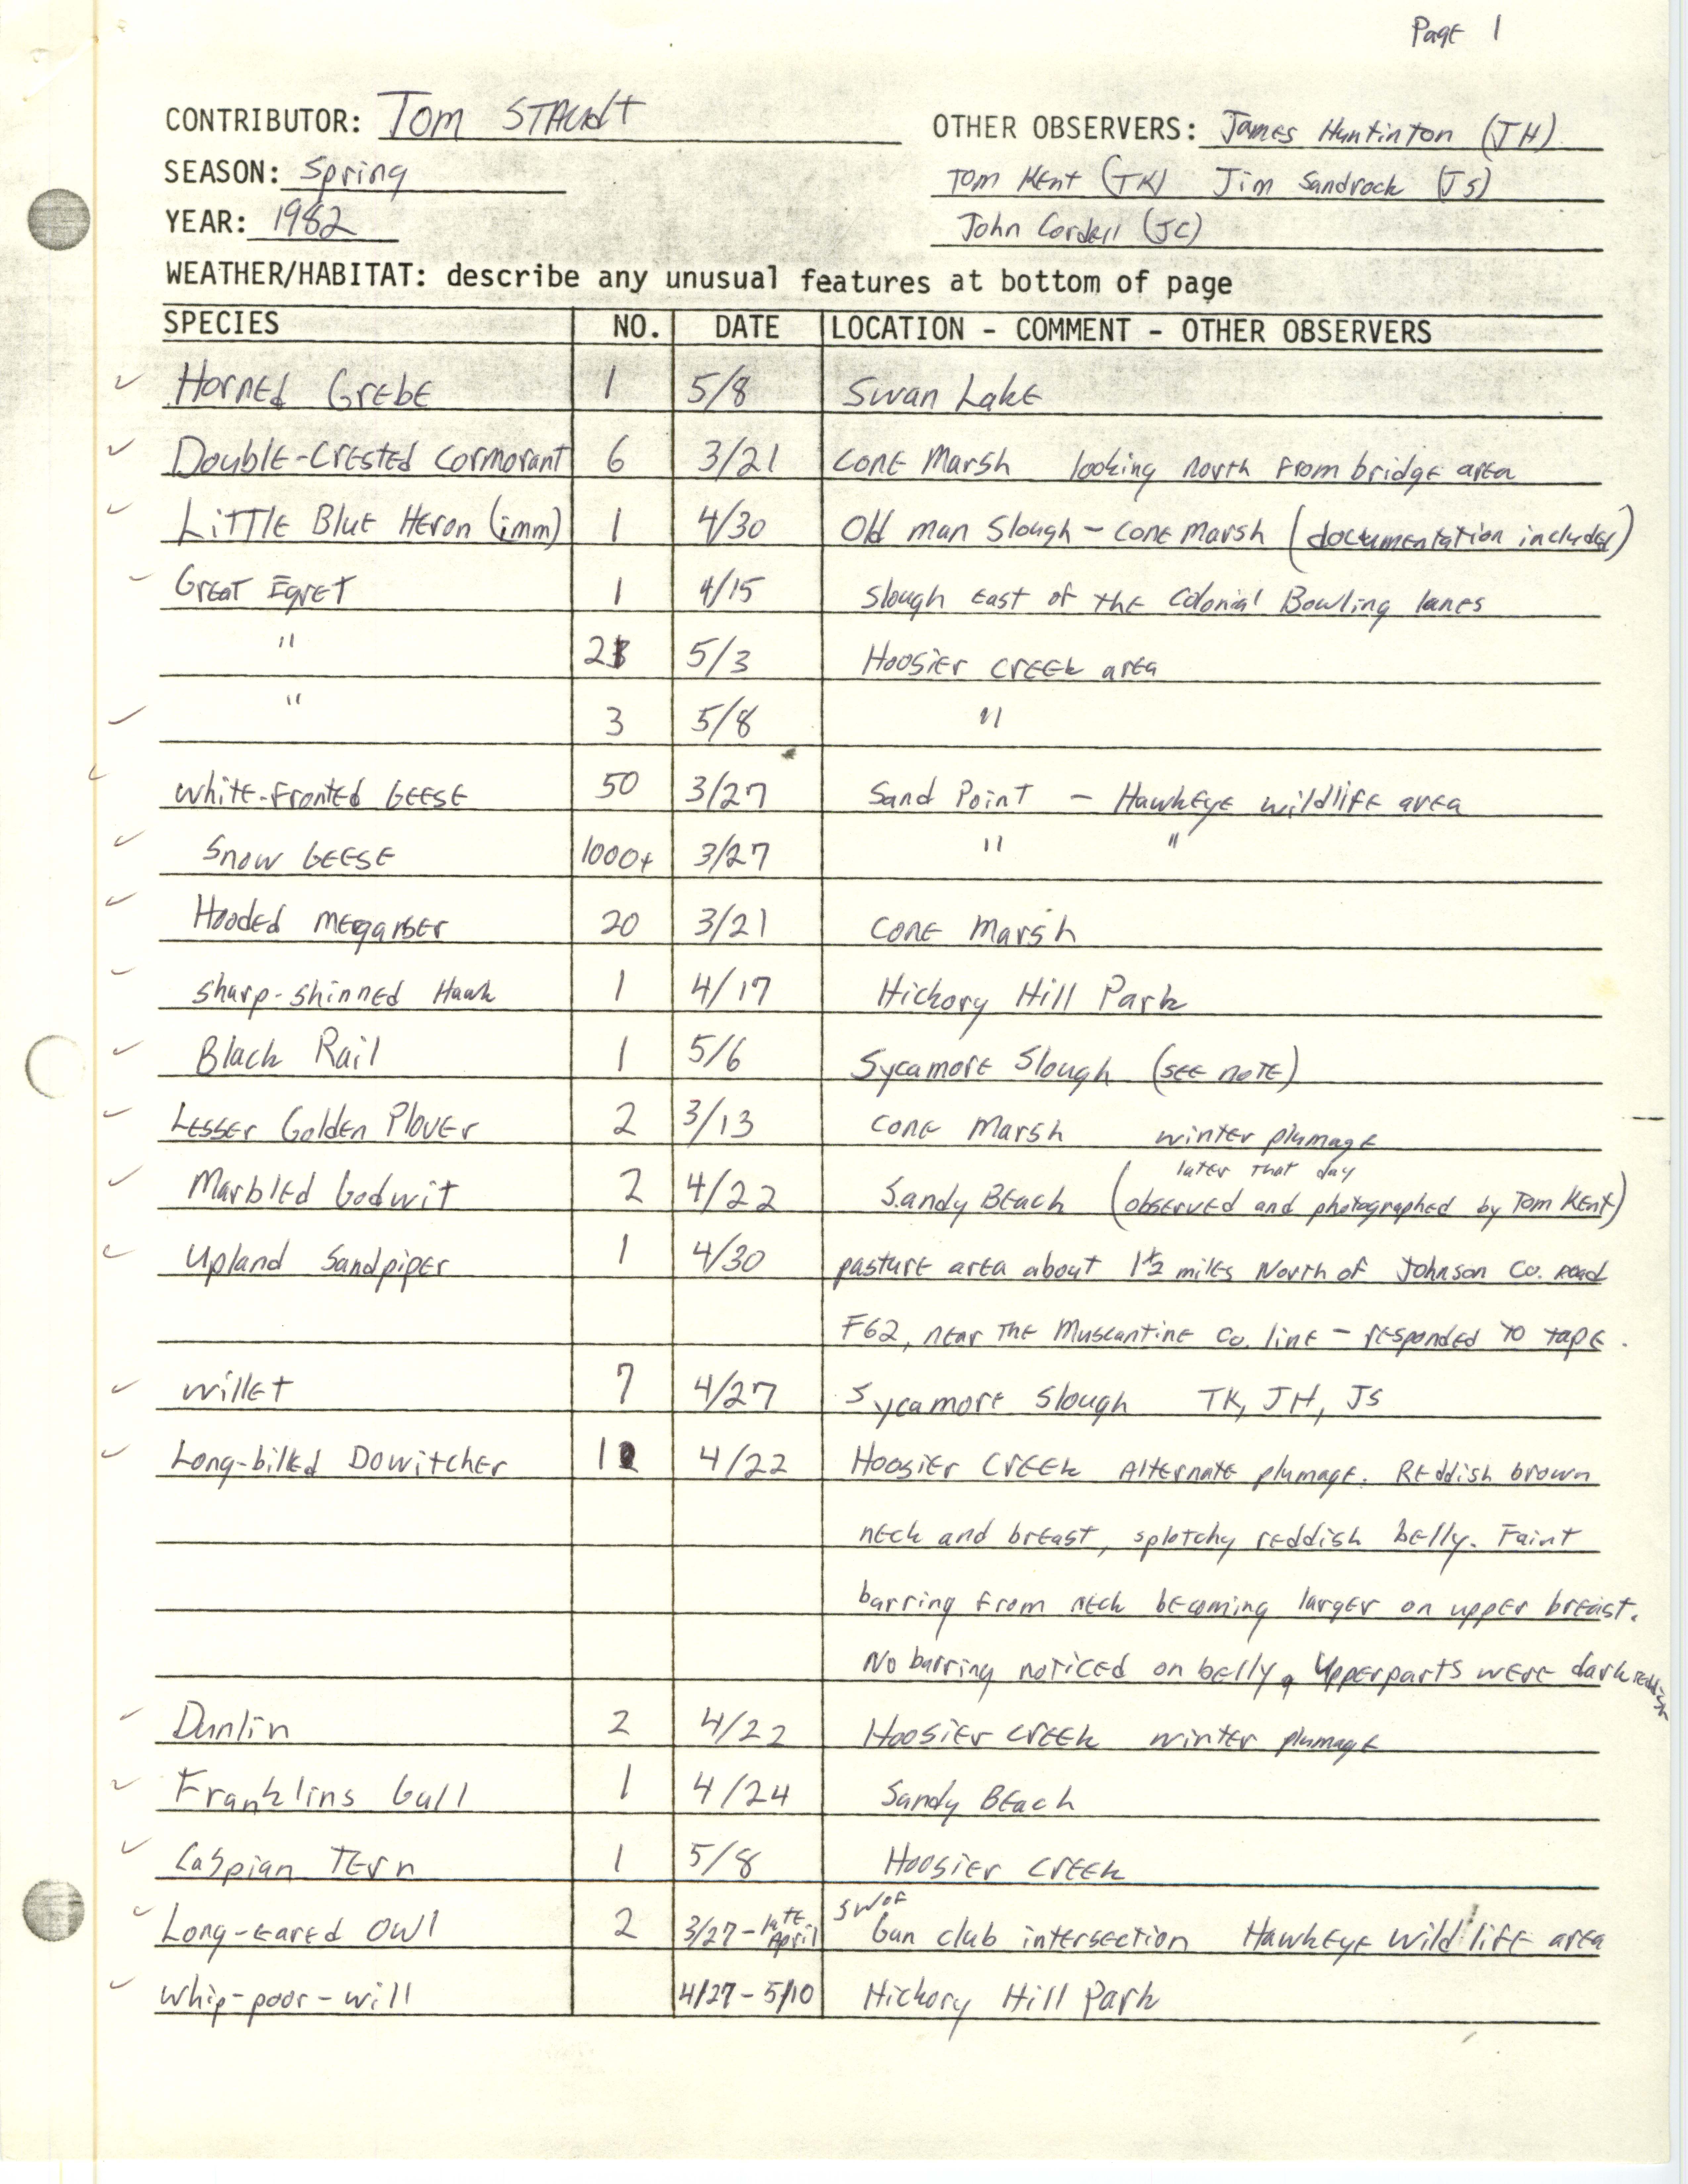 Field notes contributed by Thomas J. Staudt, spring 1982